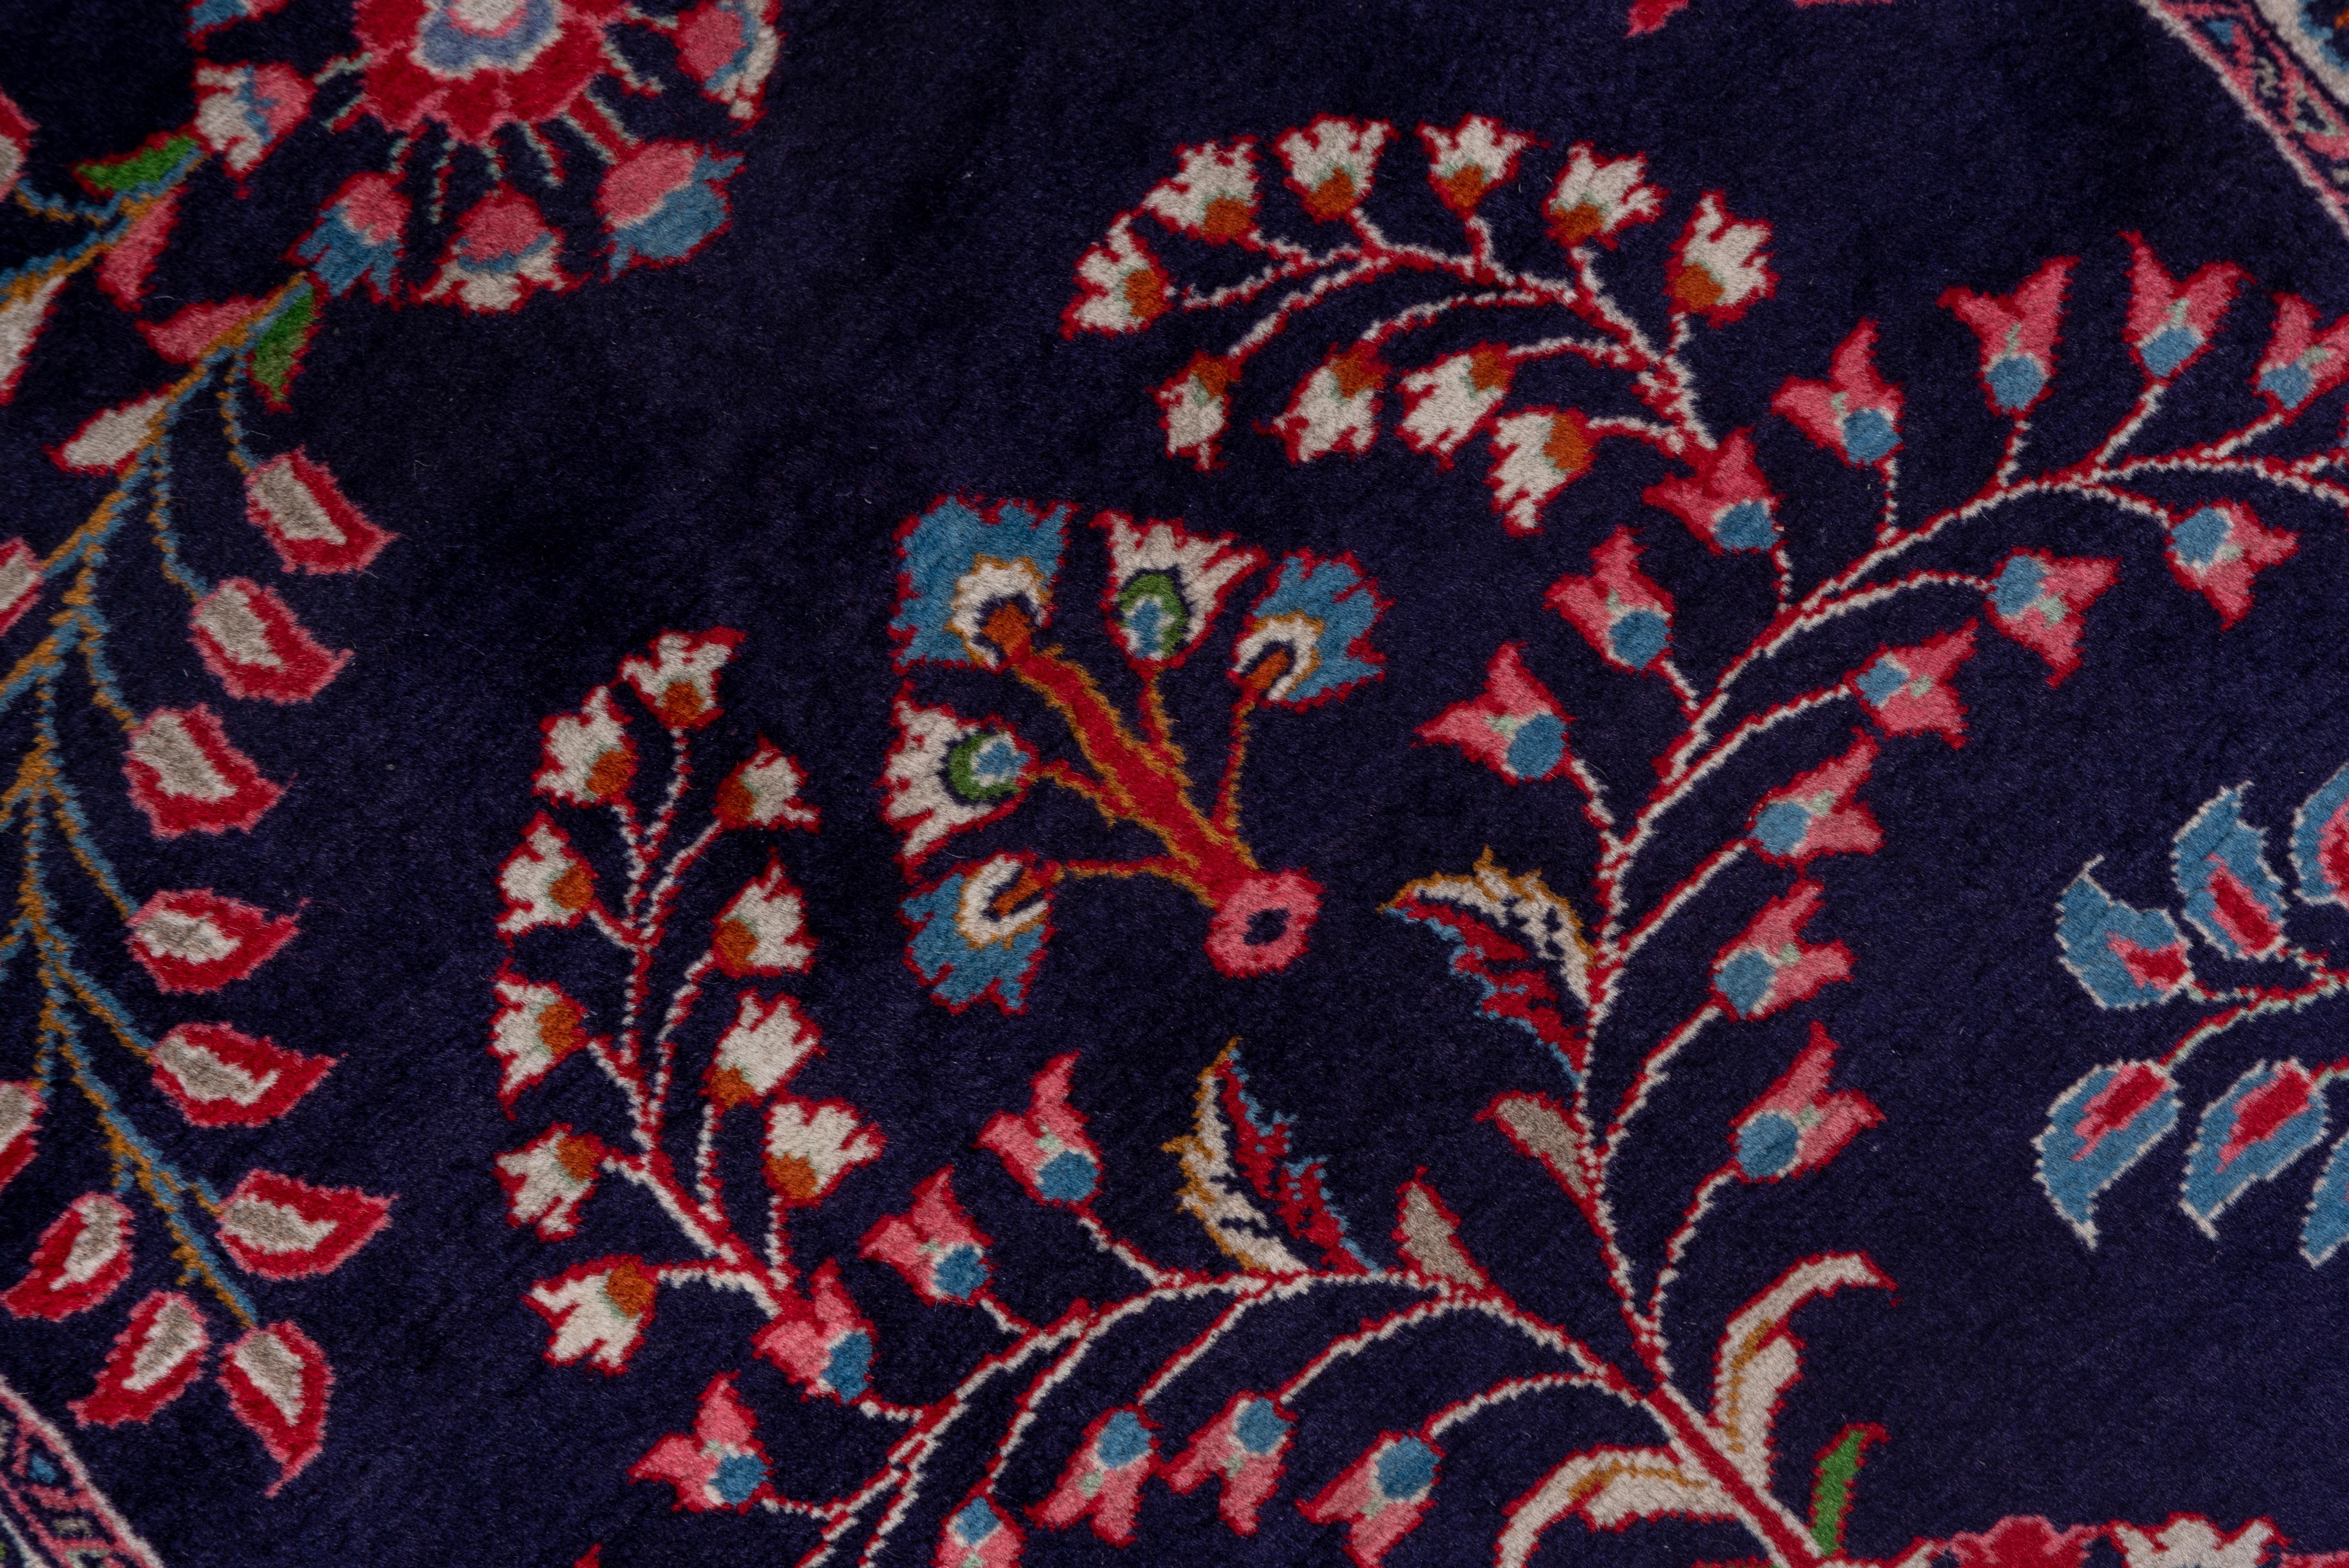 Wool Mid-20th Century Persian Sarouk Runner, Navy Field, Red Accents, circa 1950s For Sale